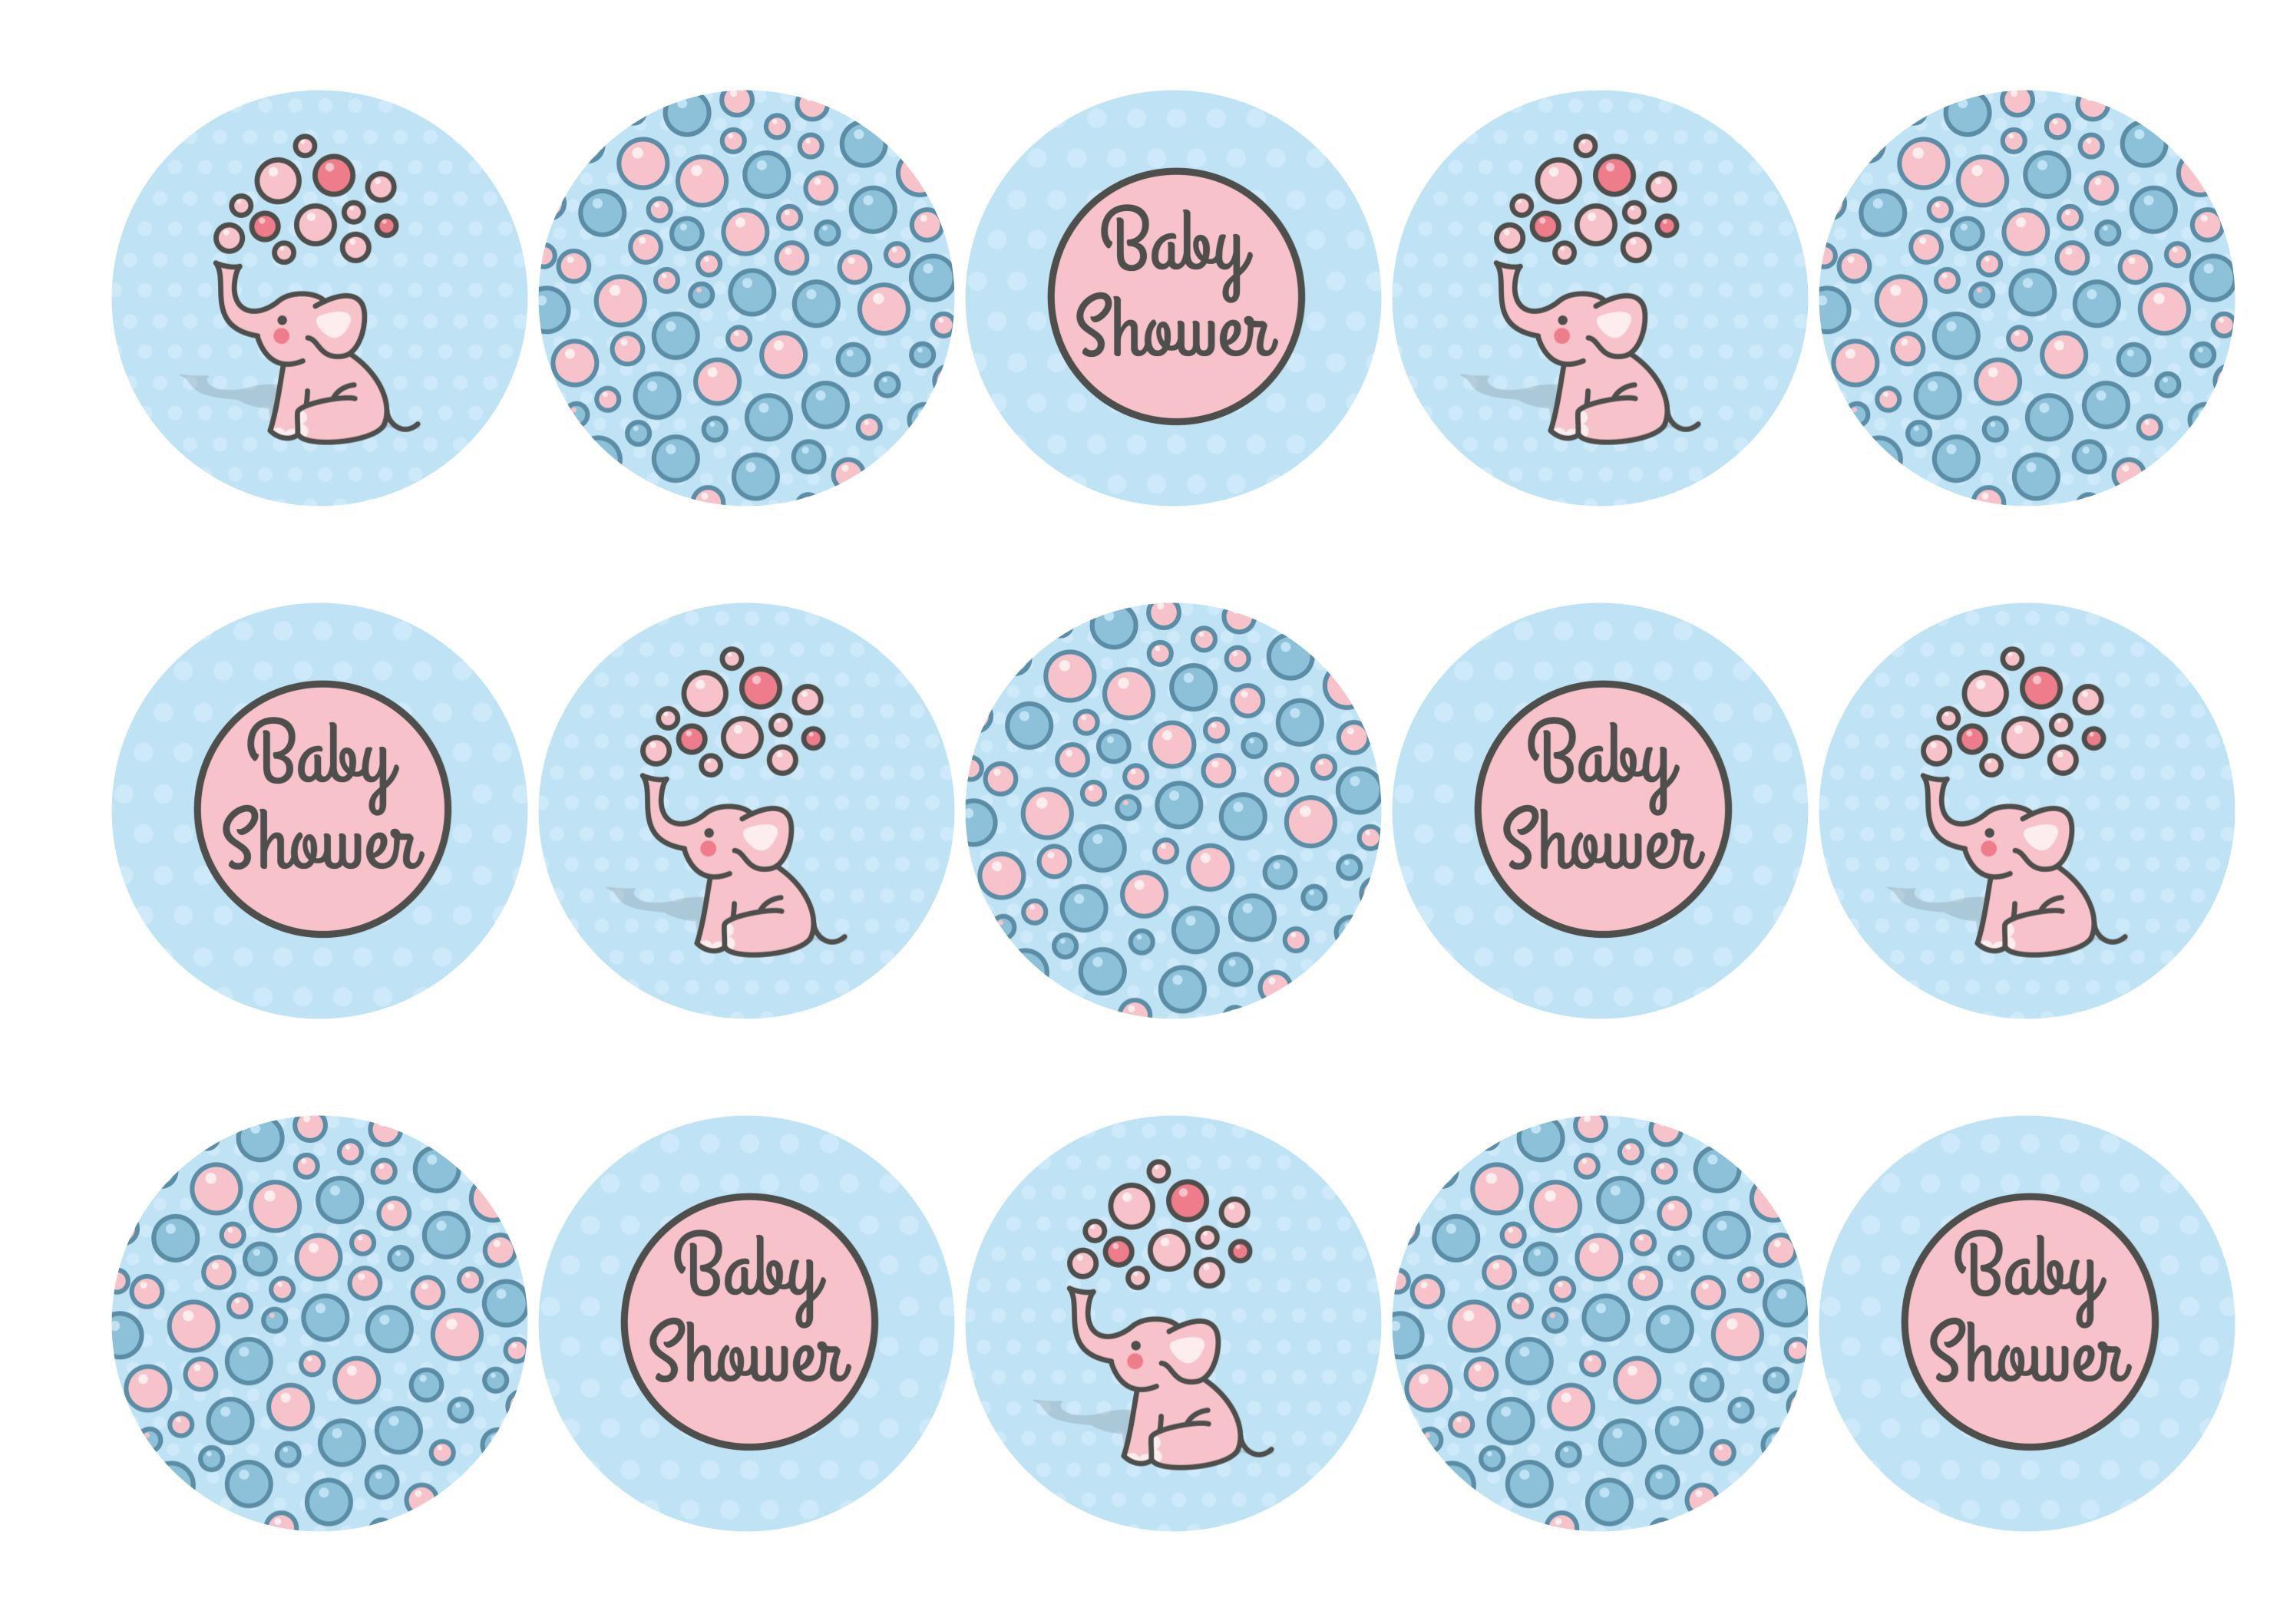 15 printed cupcake toppers with cute baby elephants for a baby shower